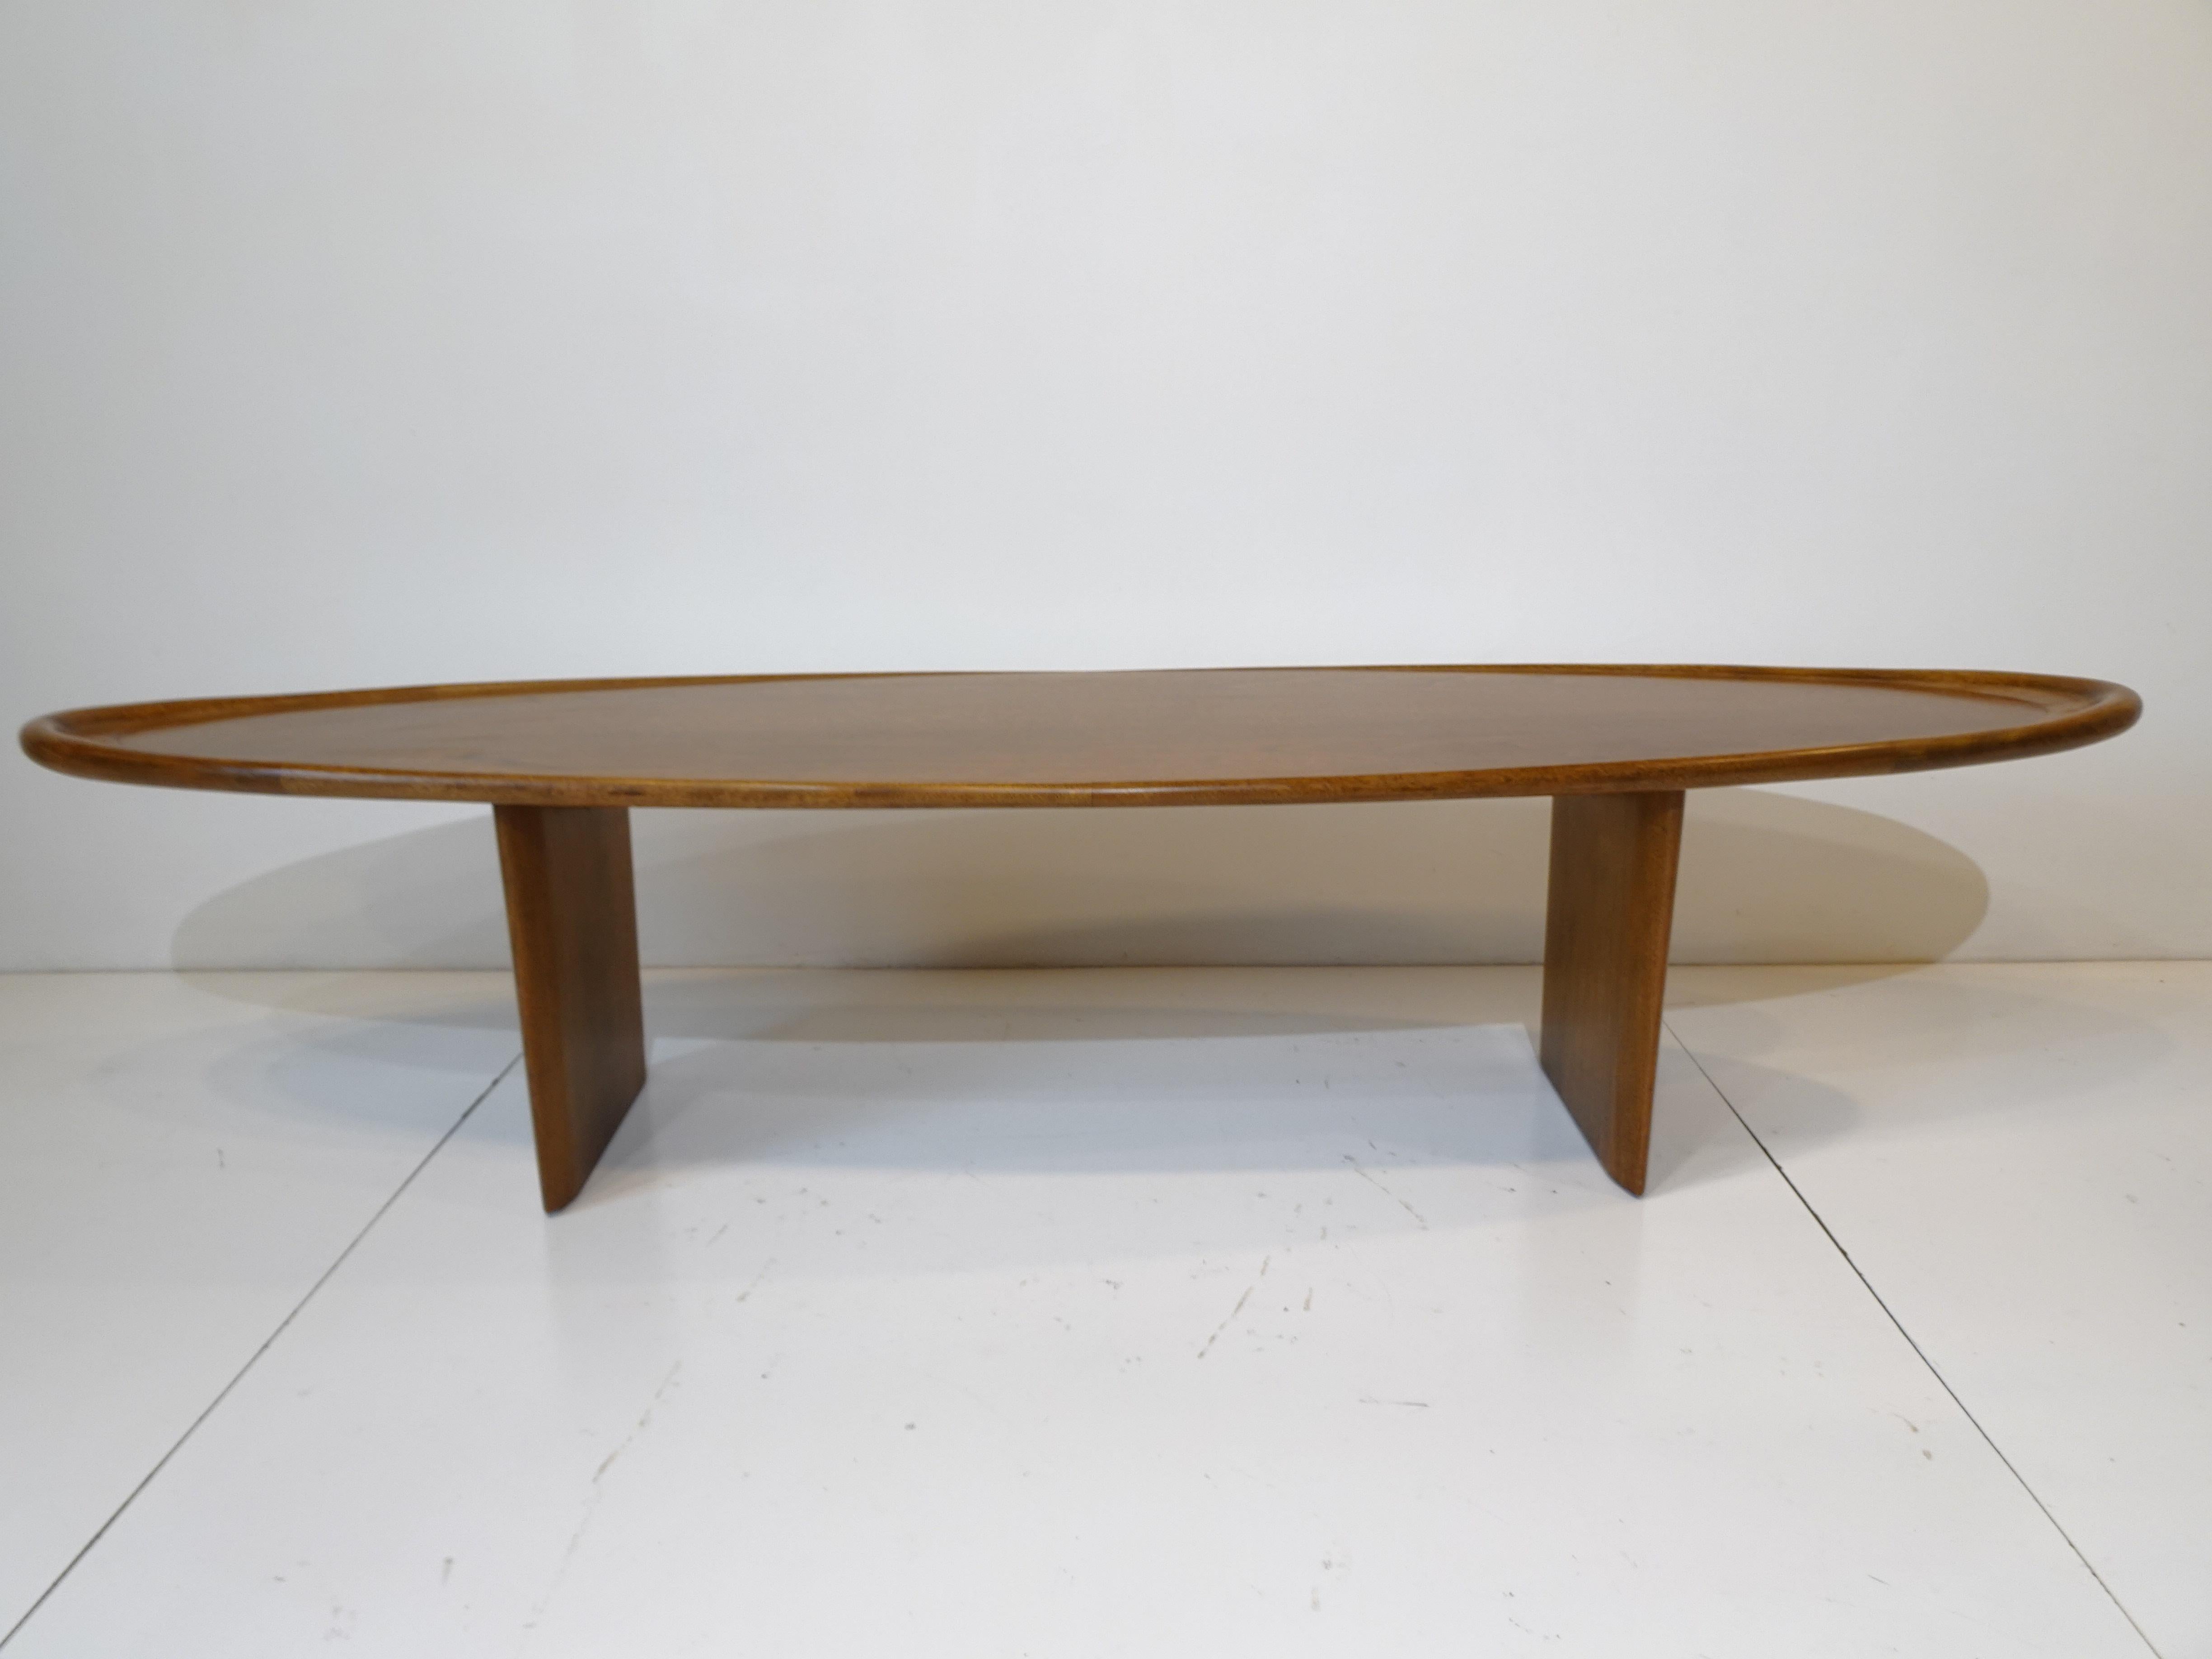 A rare elongated oval surfboard styled medium toned mahogany coffee table with rounded rolled upturned lip sitting on tapered plinth bases . The craftsmanship of this table is outstanding with great details through out and the grain of the mahogany